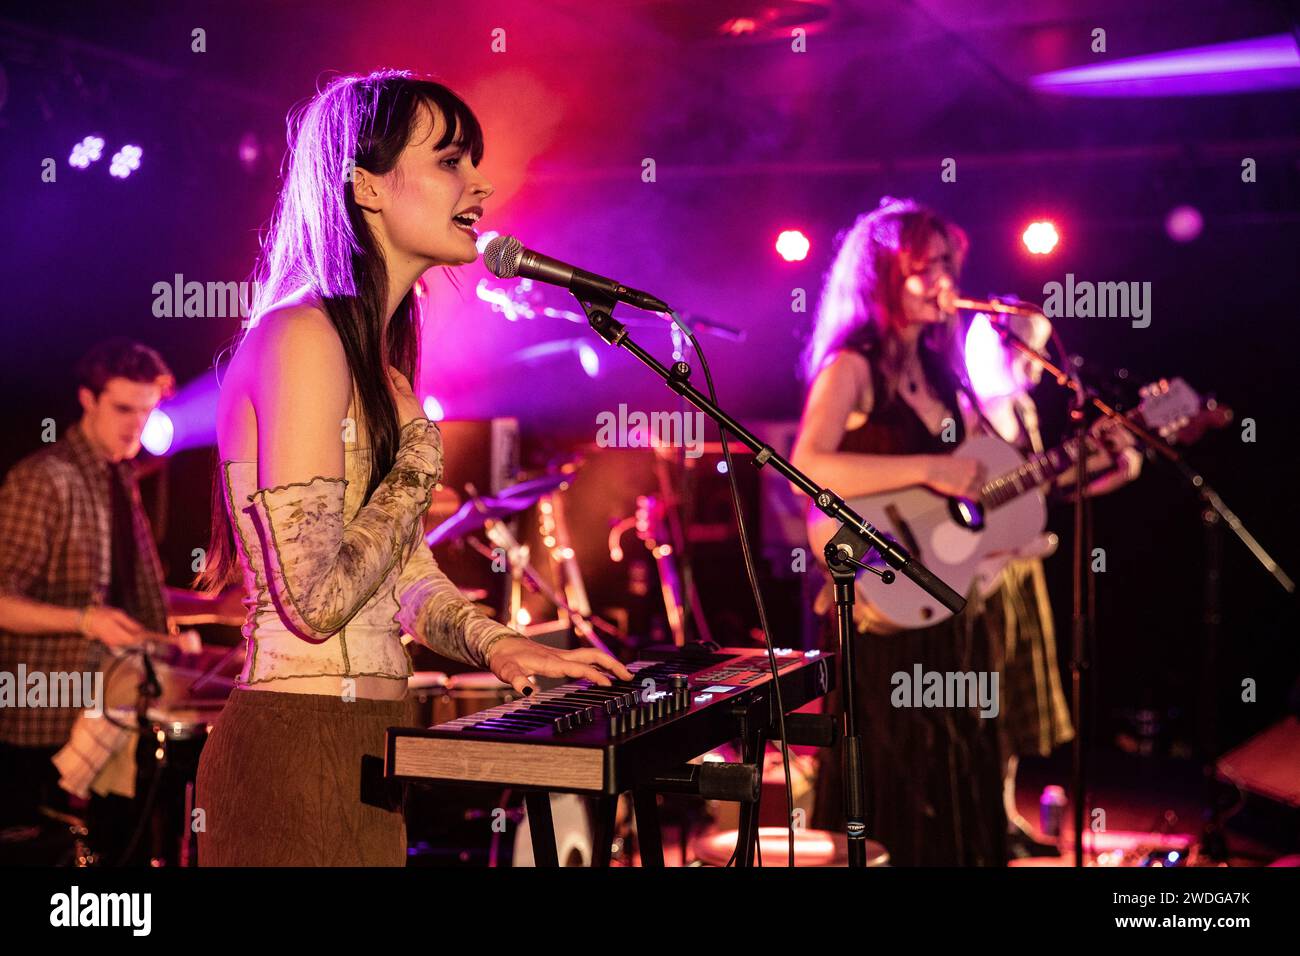 GRONINGEN - Sara Julia performs during the last day of the Eurosonic Noorderslag festival. ANP PAUL BERGEN netherlands out - belgium out Stock Photo